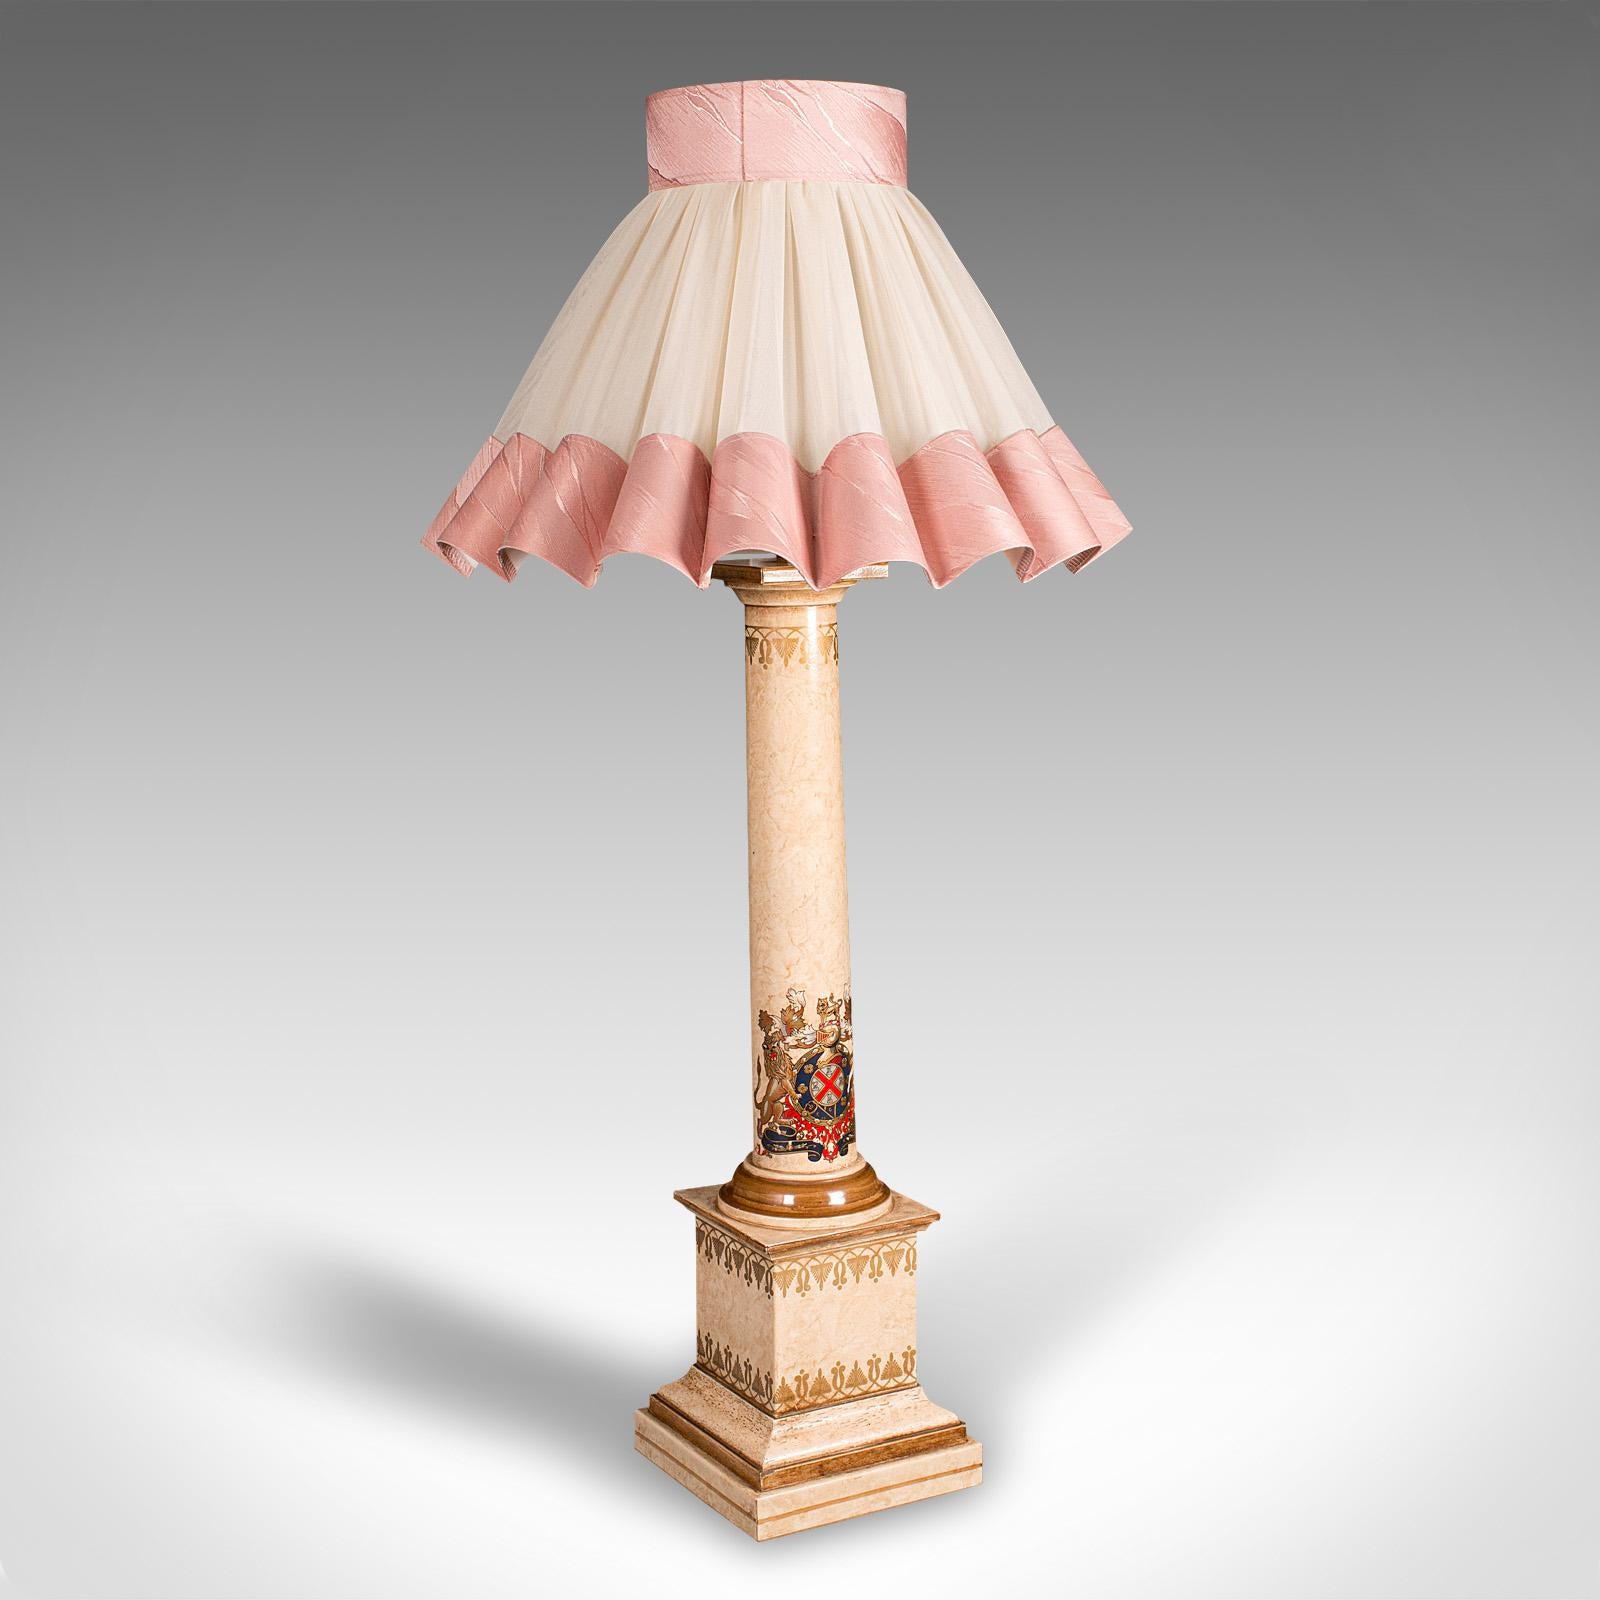 20th Century Tall Pair Of Vintage Table Lamps, English, Decorative Light, Mid Century, C.1960 For Sale